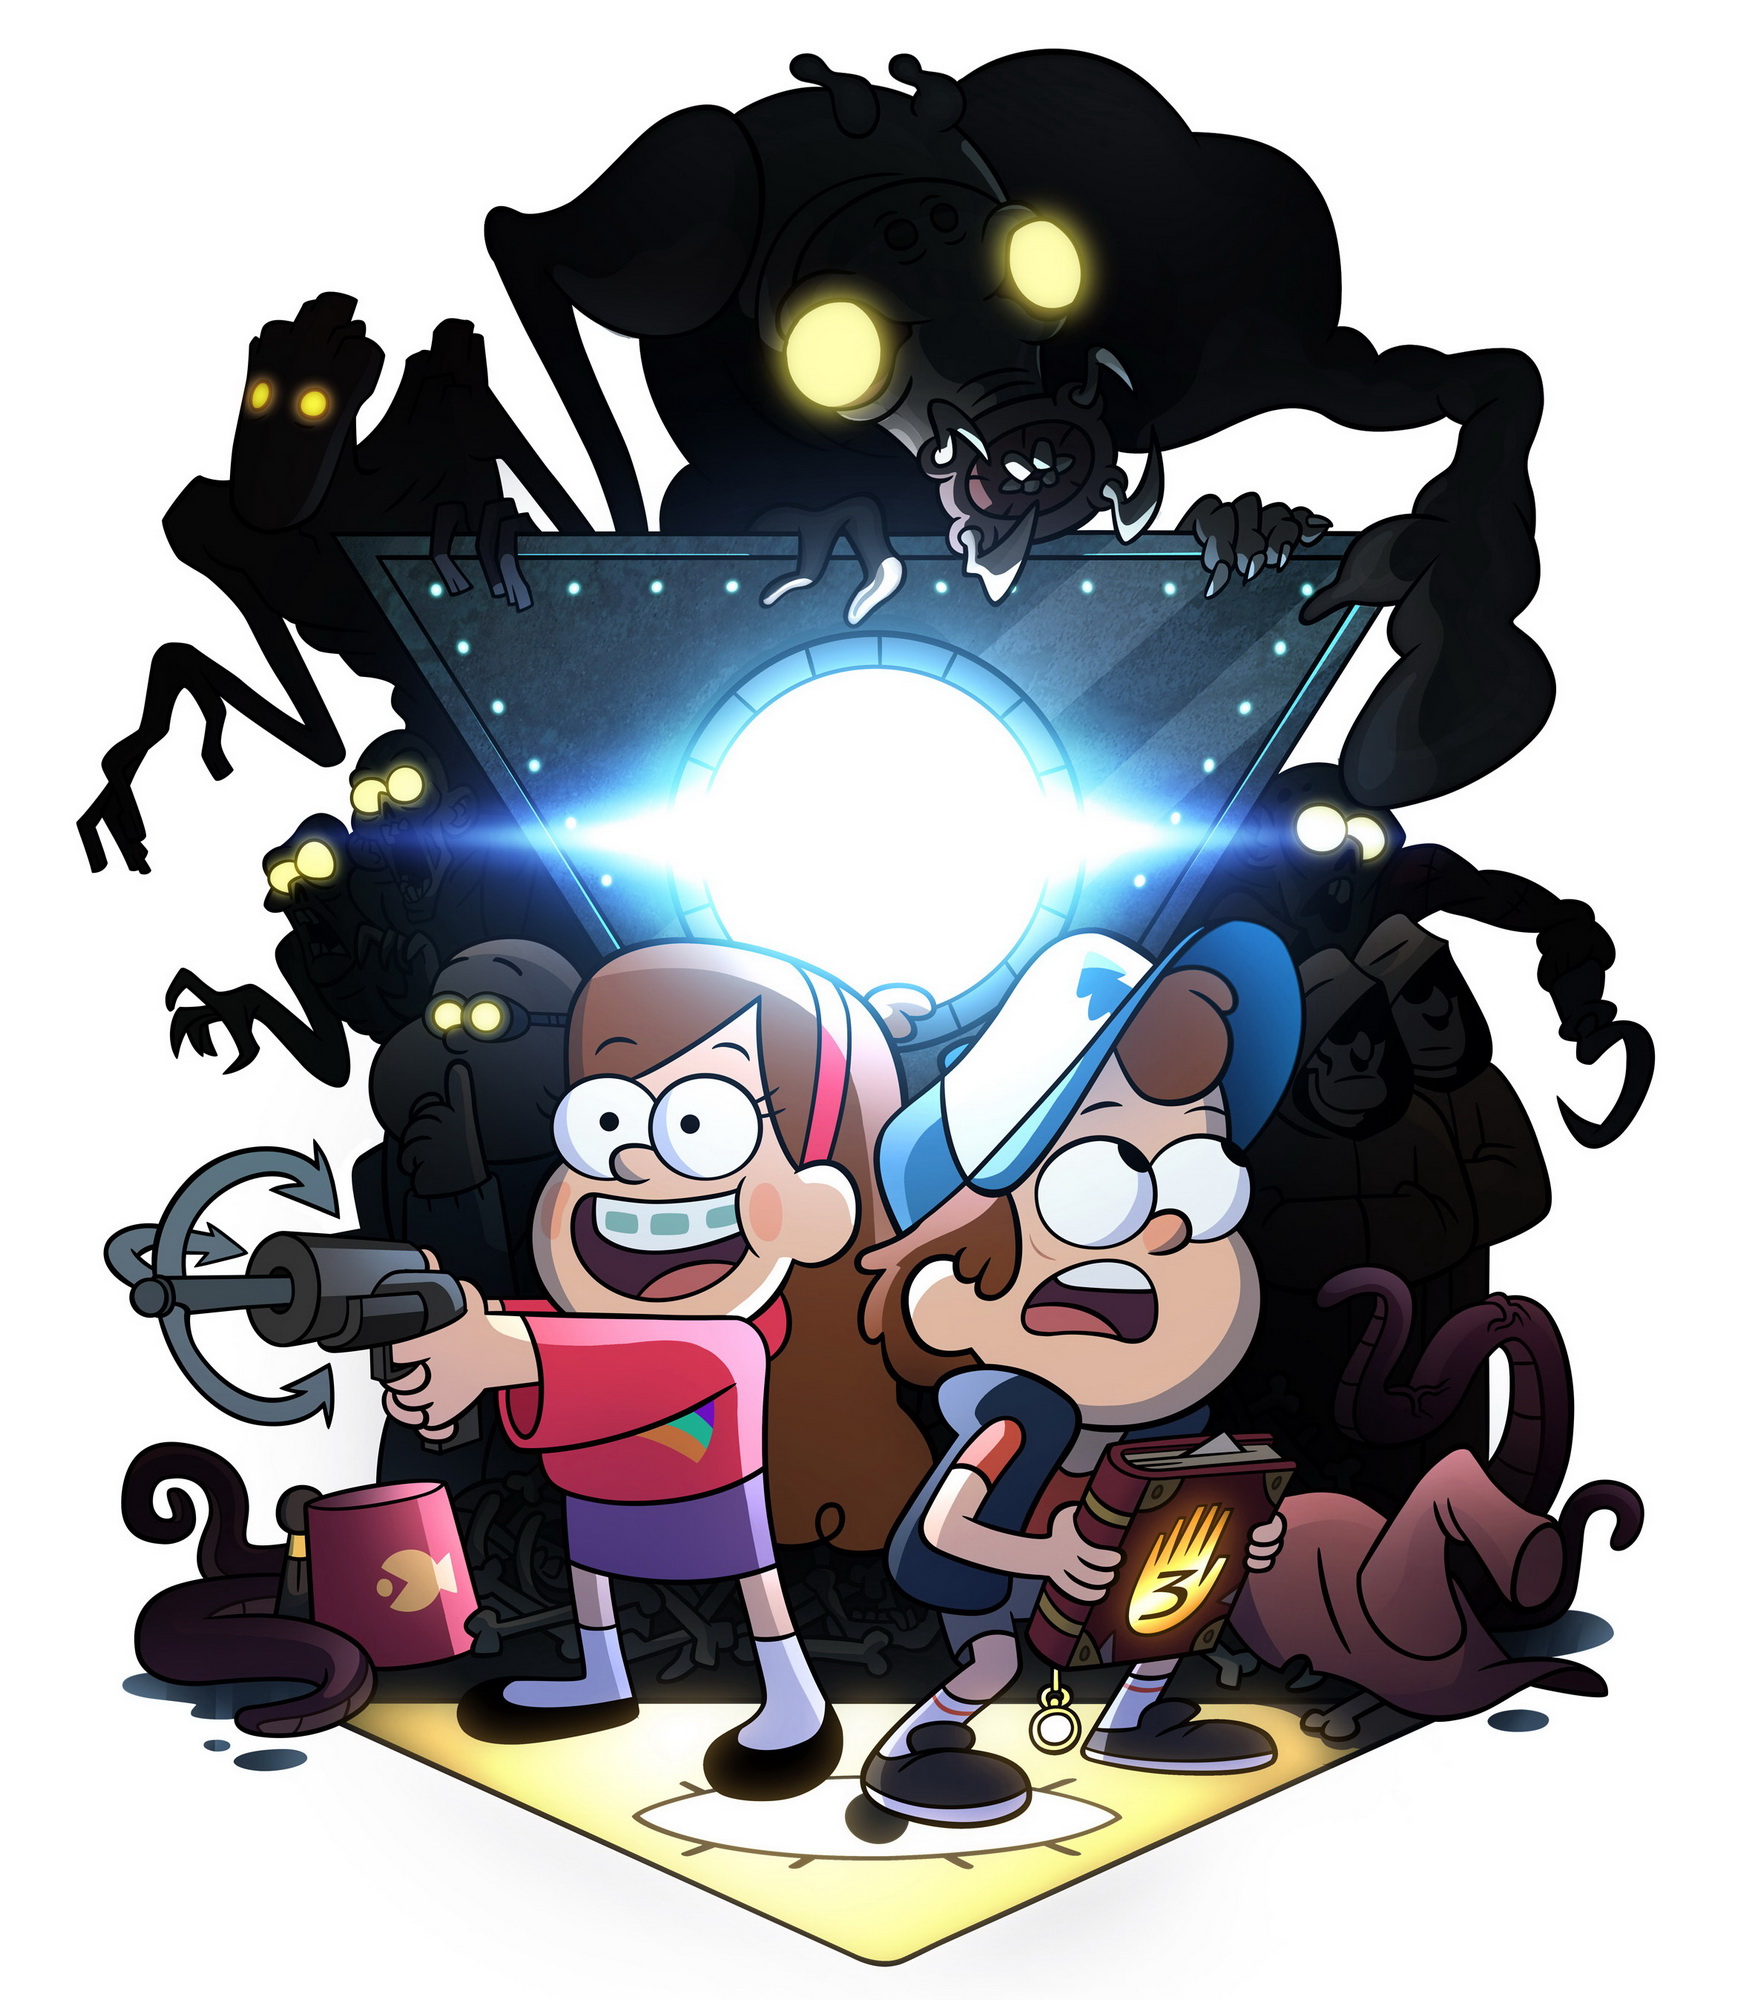 Saturday Morning Cartoons: Mysteries abound in “Gravity Falls” | Rooster Illusion